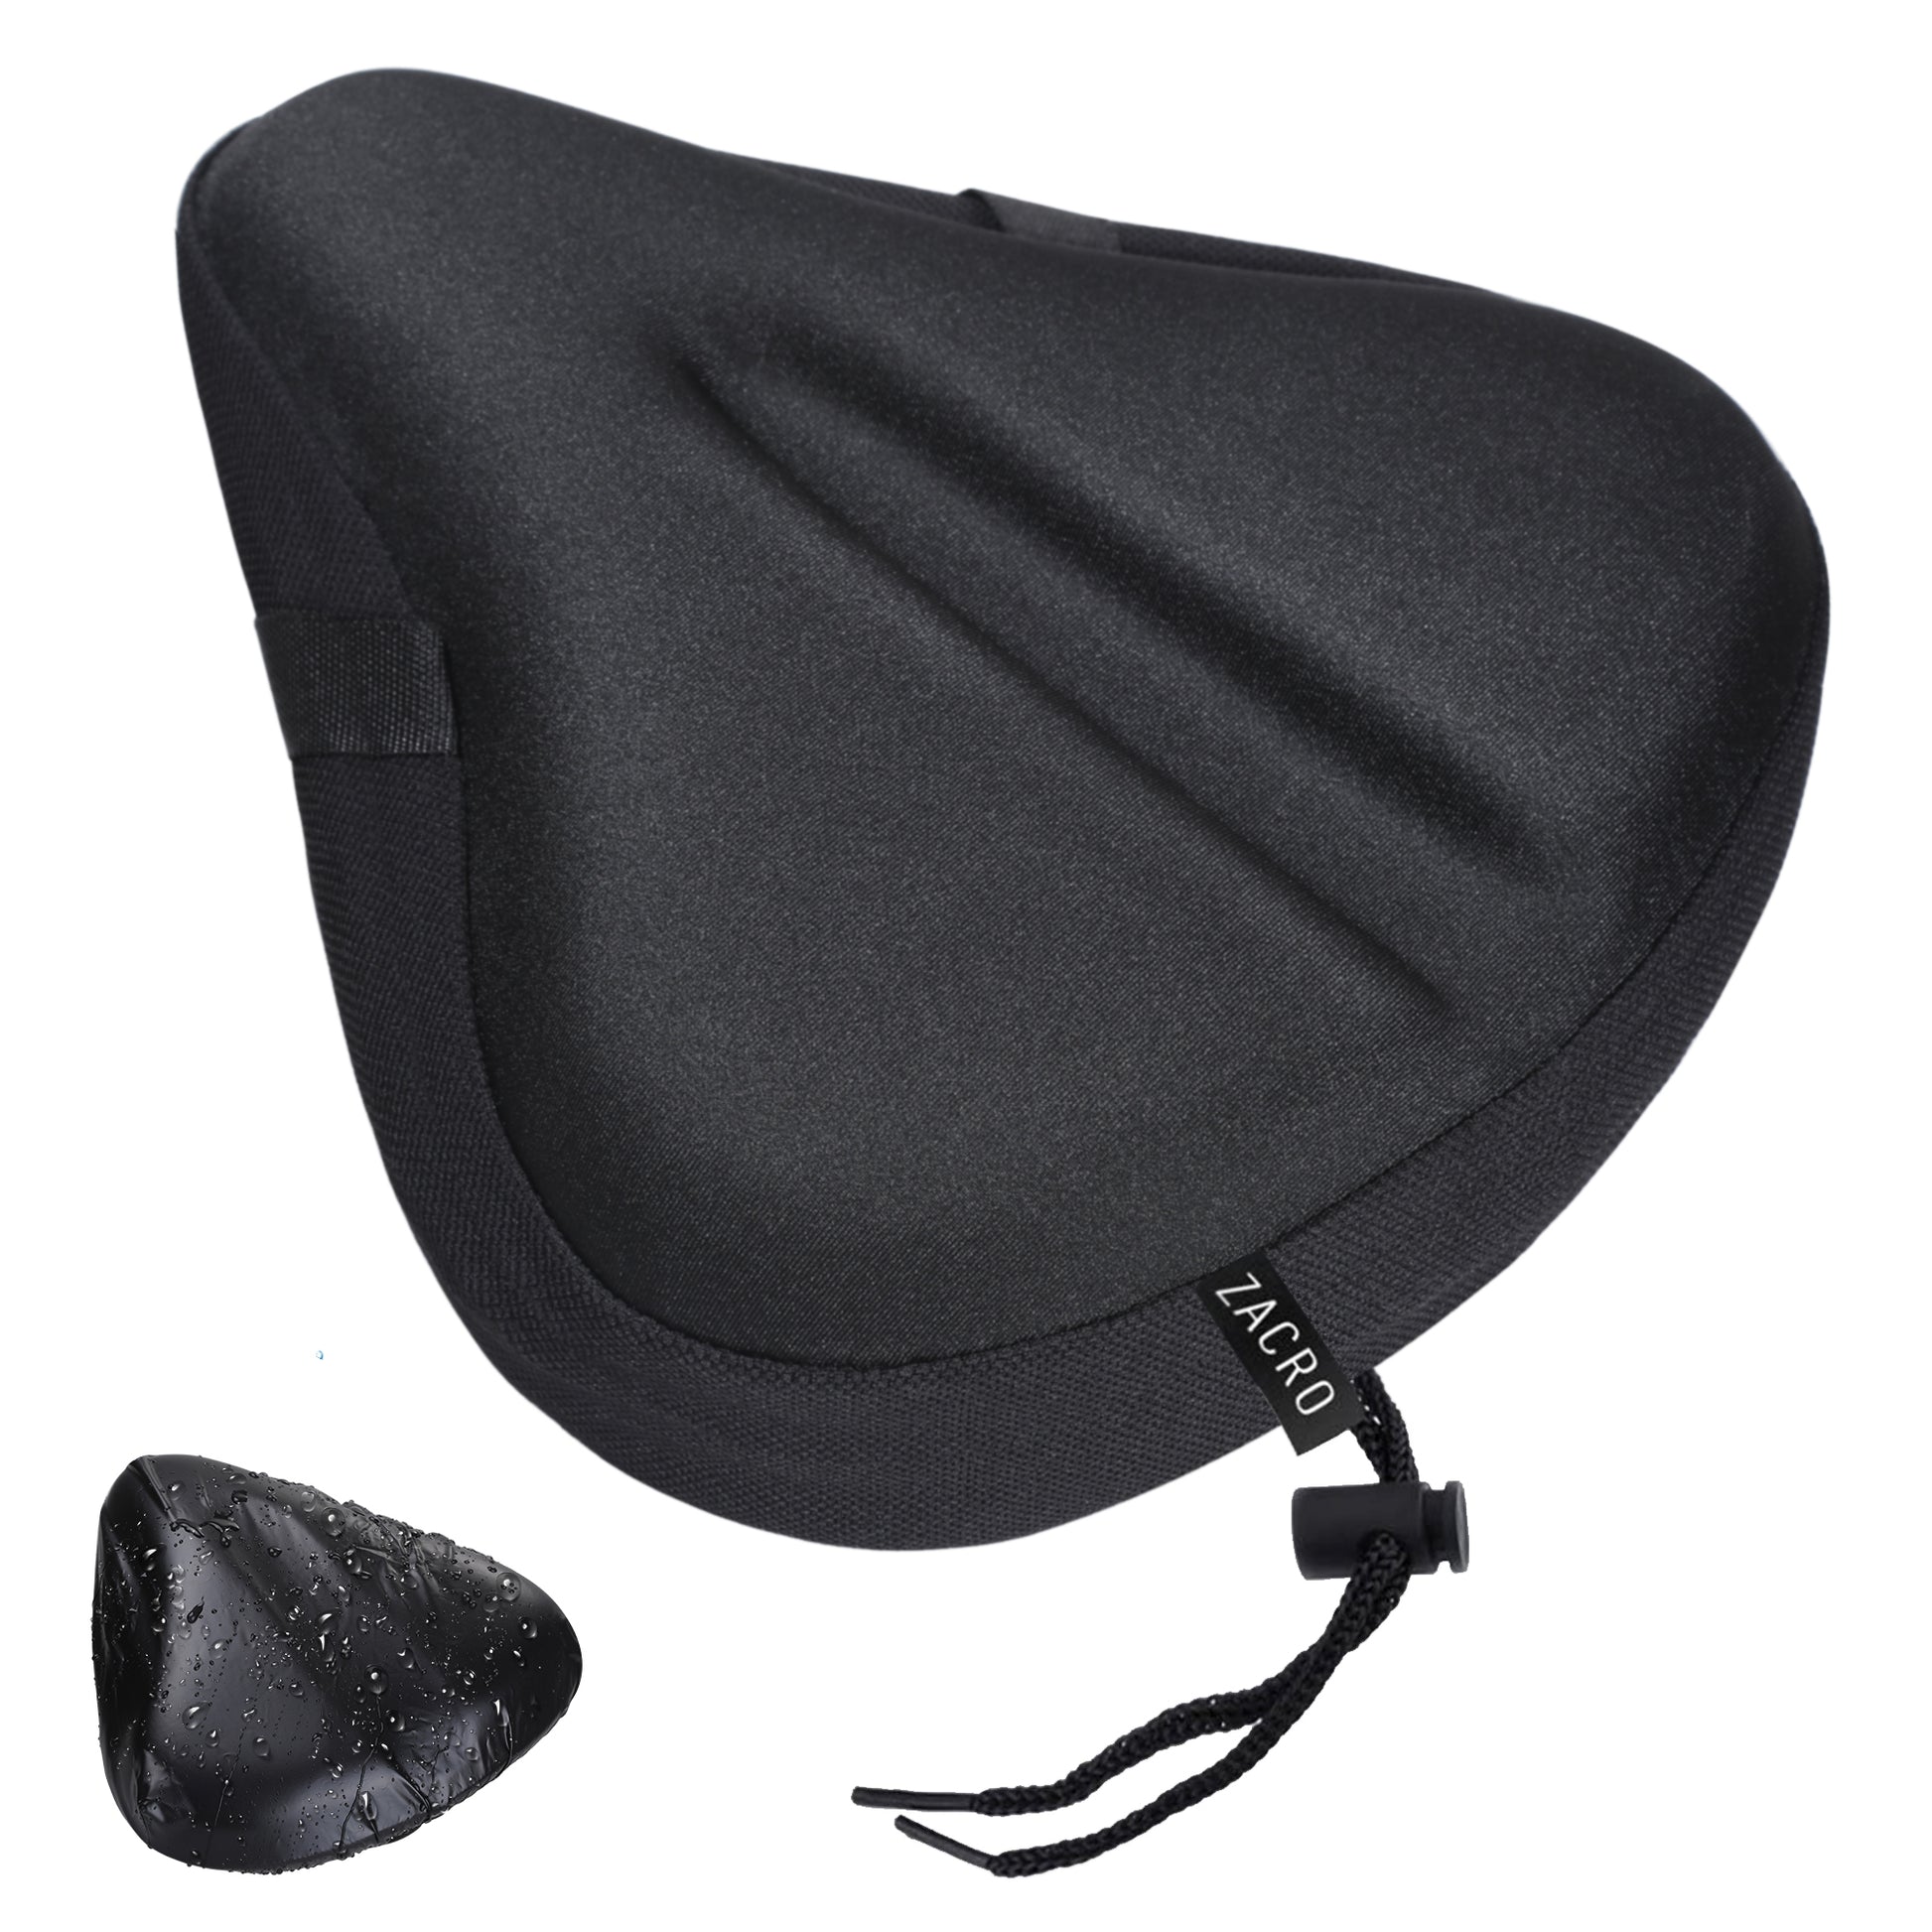  Blue Onion Gel Bike Seat Covers Black Cover with Night Riding  Safety Reflector - The Most Comfortable Exercise Bike Seat and E-Bike  Cushion Cover with Thicker Padding for Men 